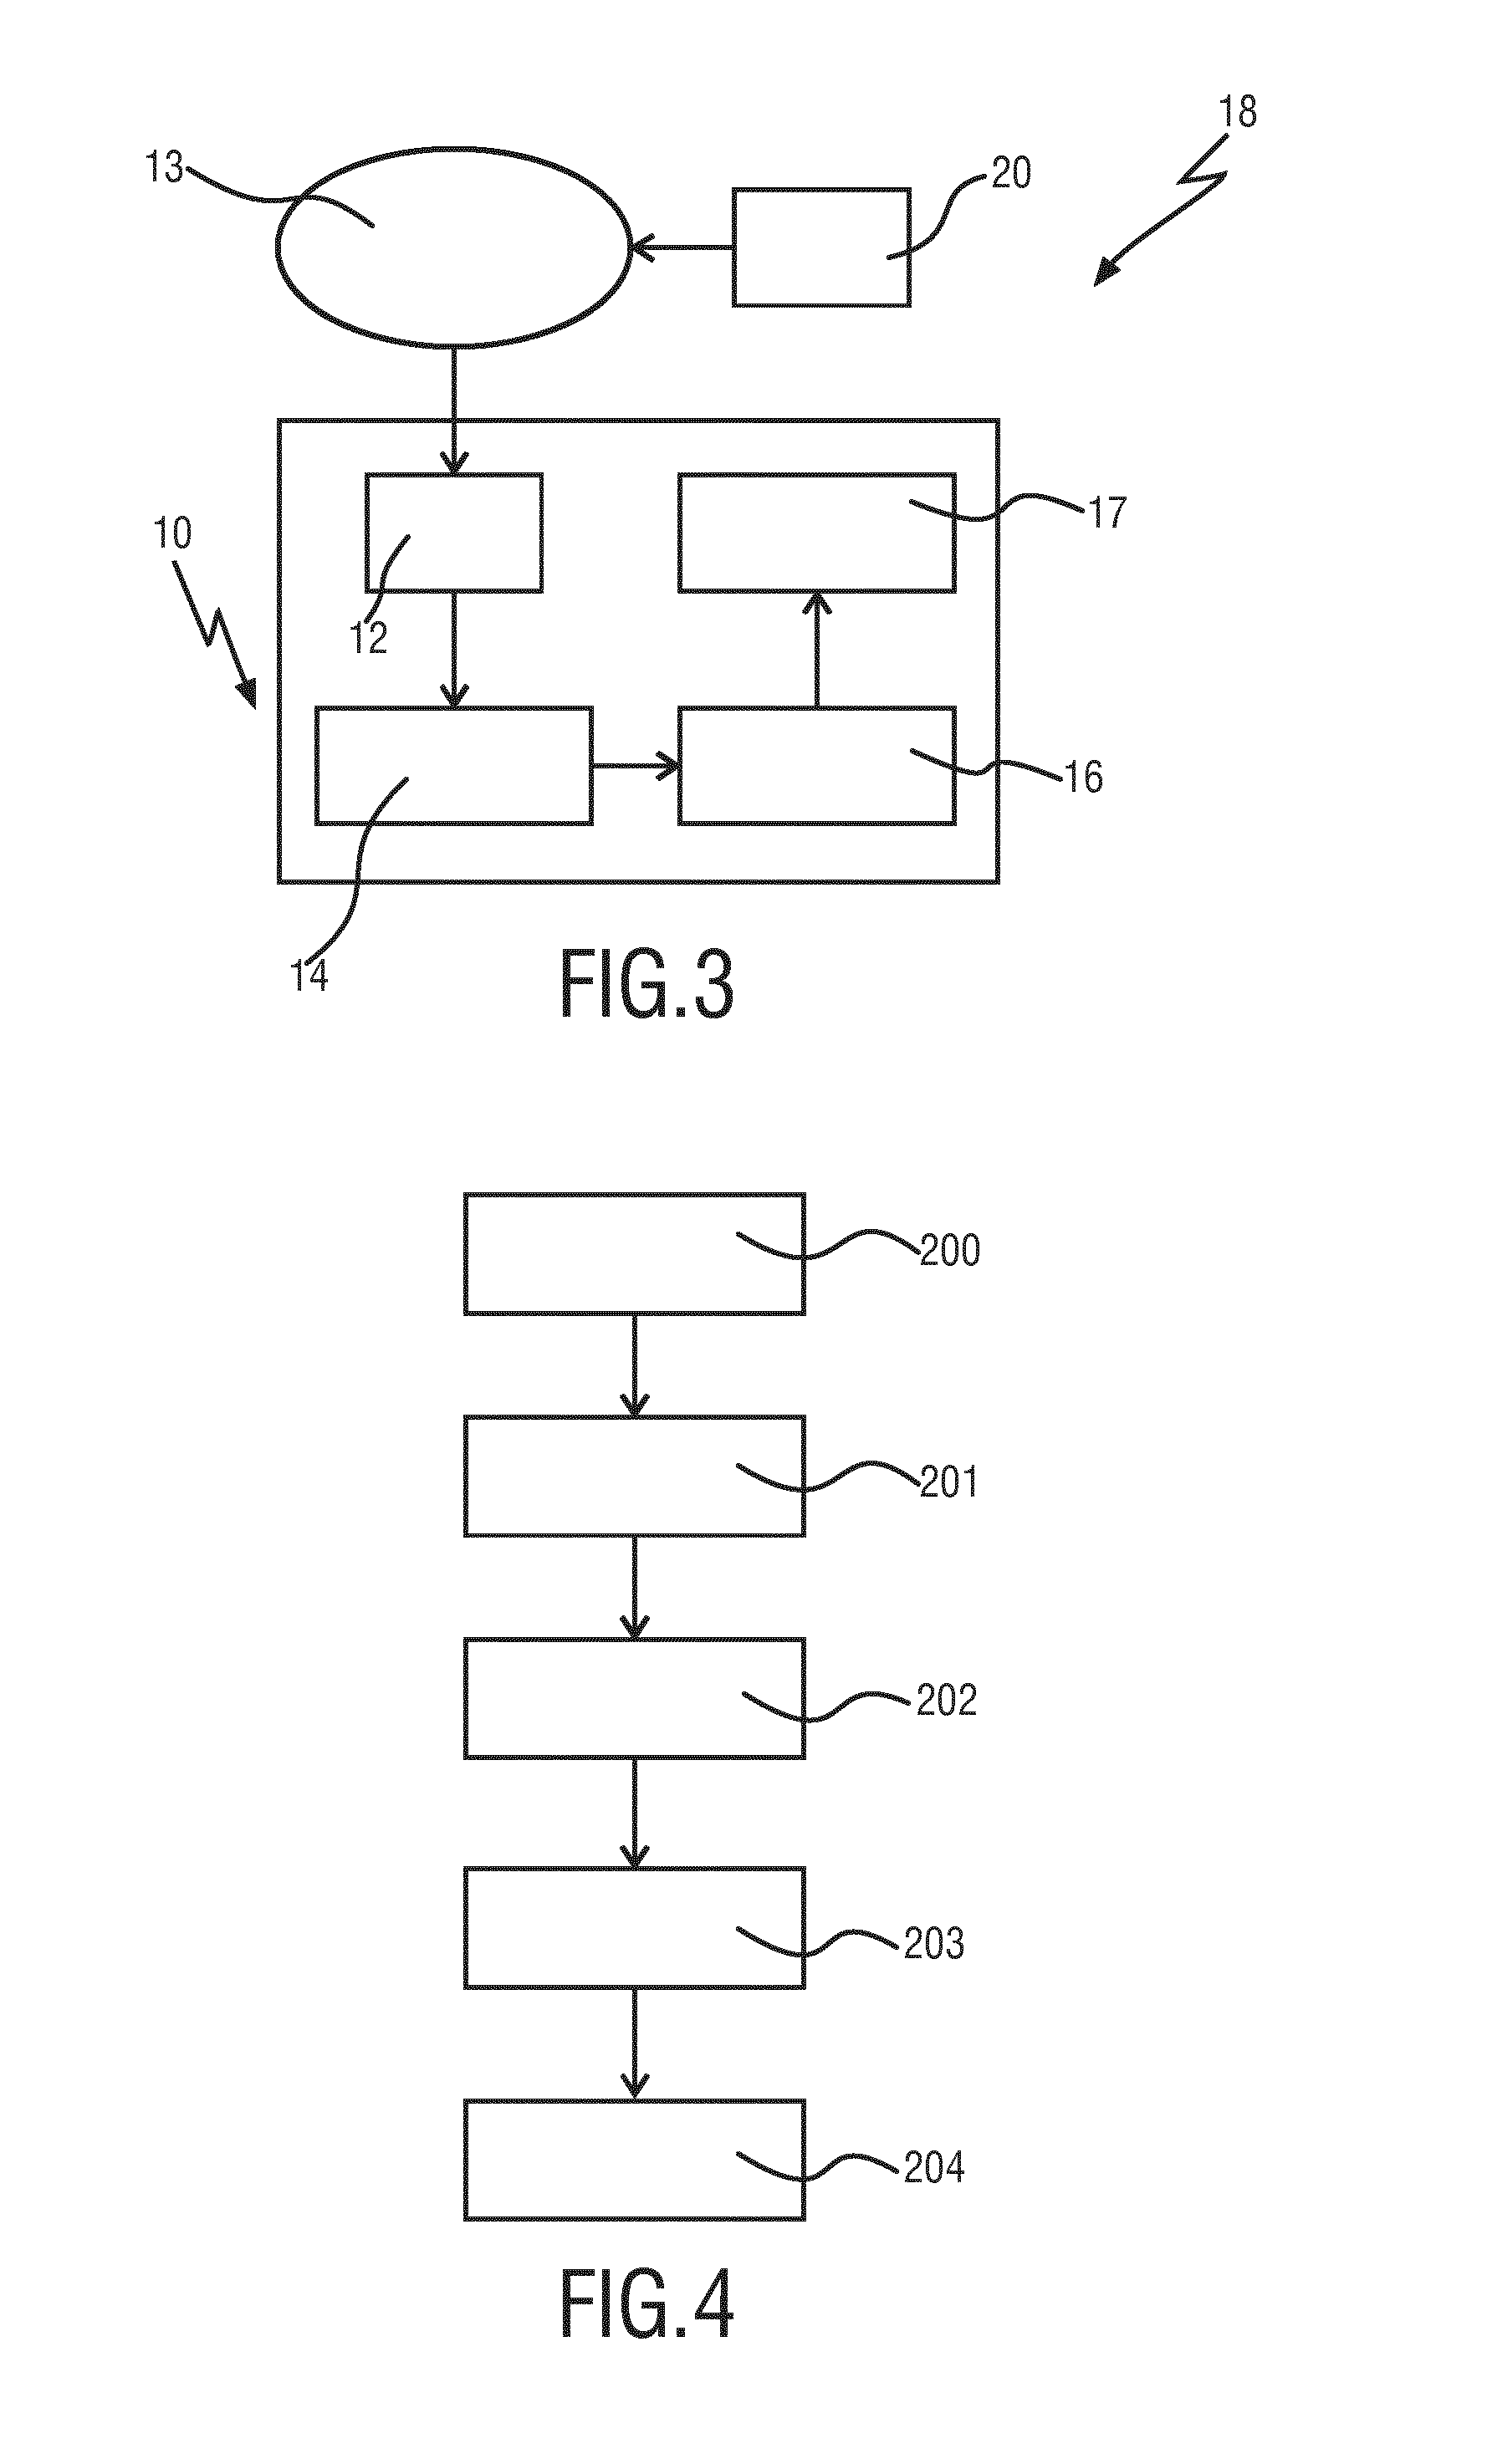 Processor for processing skin conductance data and device for detecting at least one stage of burnout and/or chronic fatigue syndrome of a living being